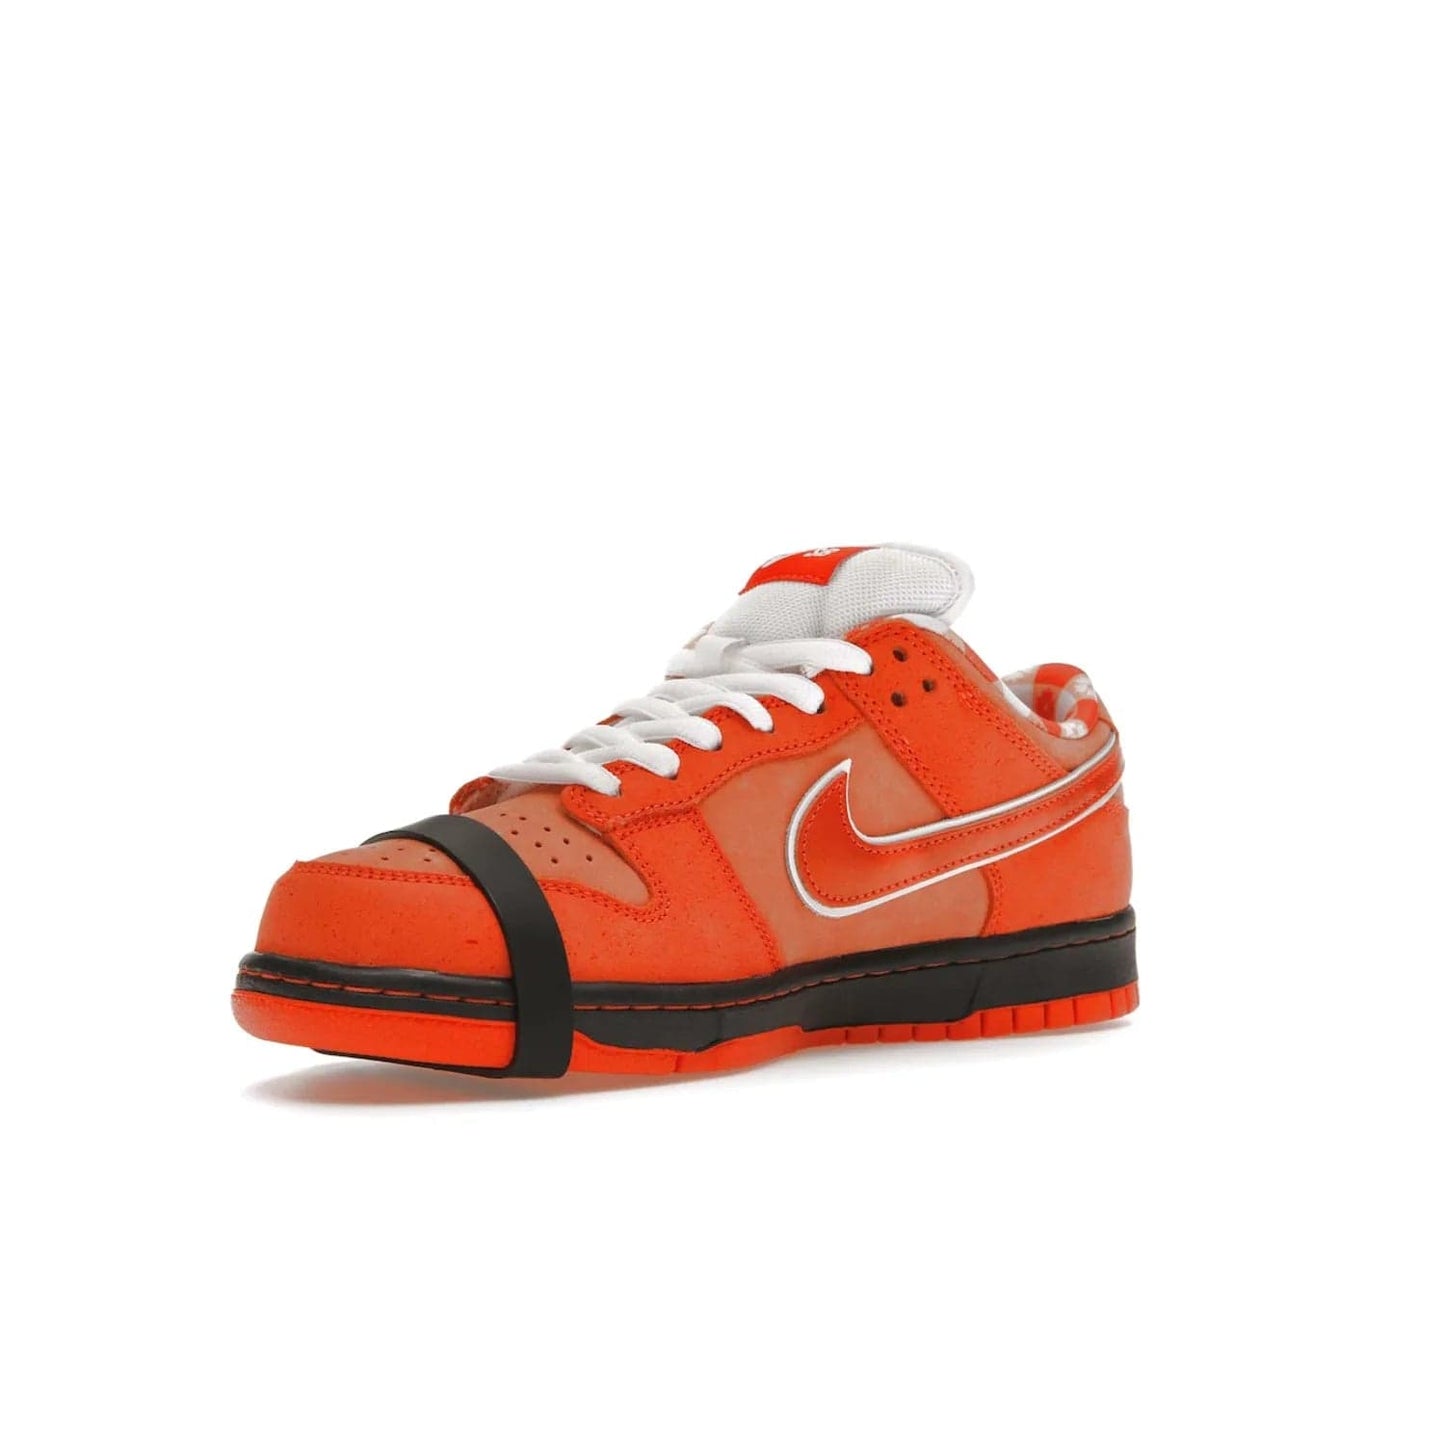 Nike SB Dunk Low Concepts Orange Lobster - Image 15 - Only at www.BallersClubKickz.com - Limited Nike SB Dunk Low Concepts Orange Lobster features premium nubuck upper with vibrant oranges for eye-catching colorblocked design. Signature Nike SB tag and bib-inspired interior for added texture. Outsole and cupsole provide extra reinforcement. Get it 12/20/2022.